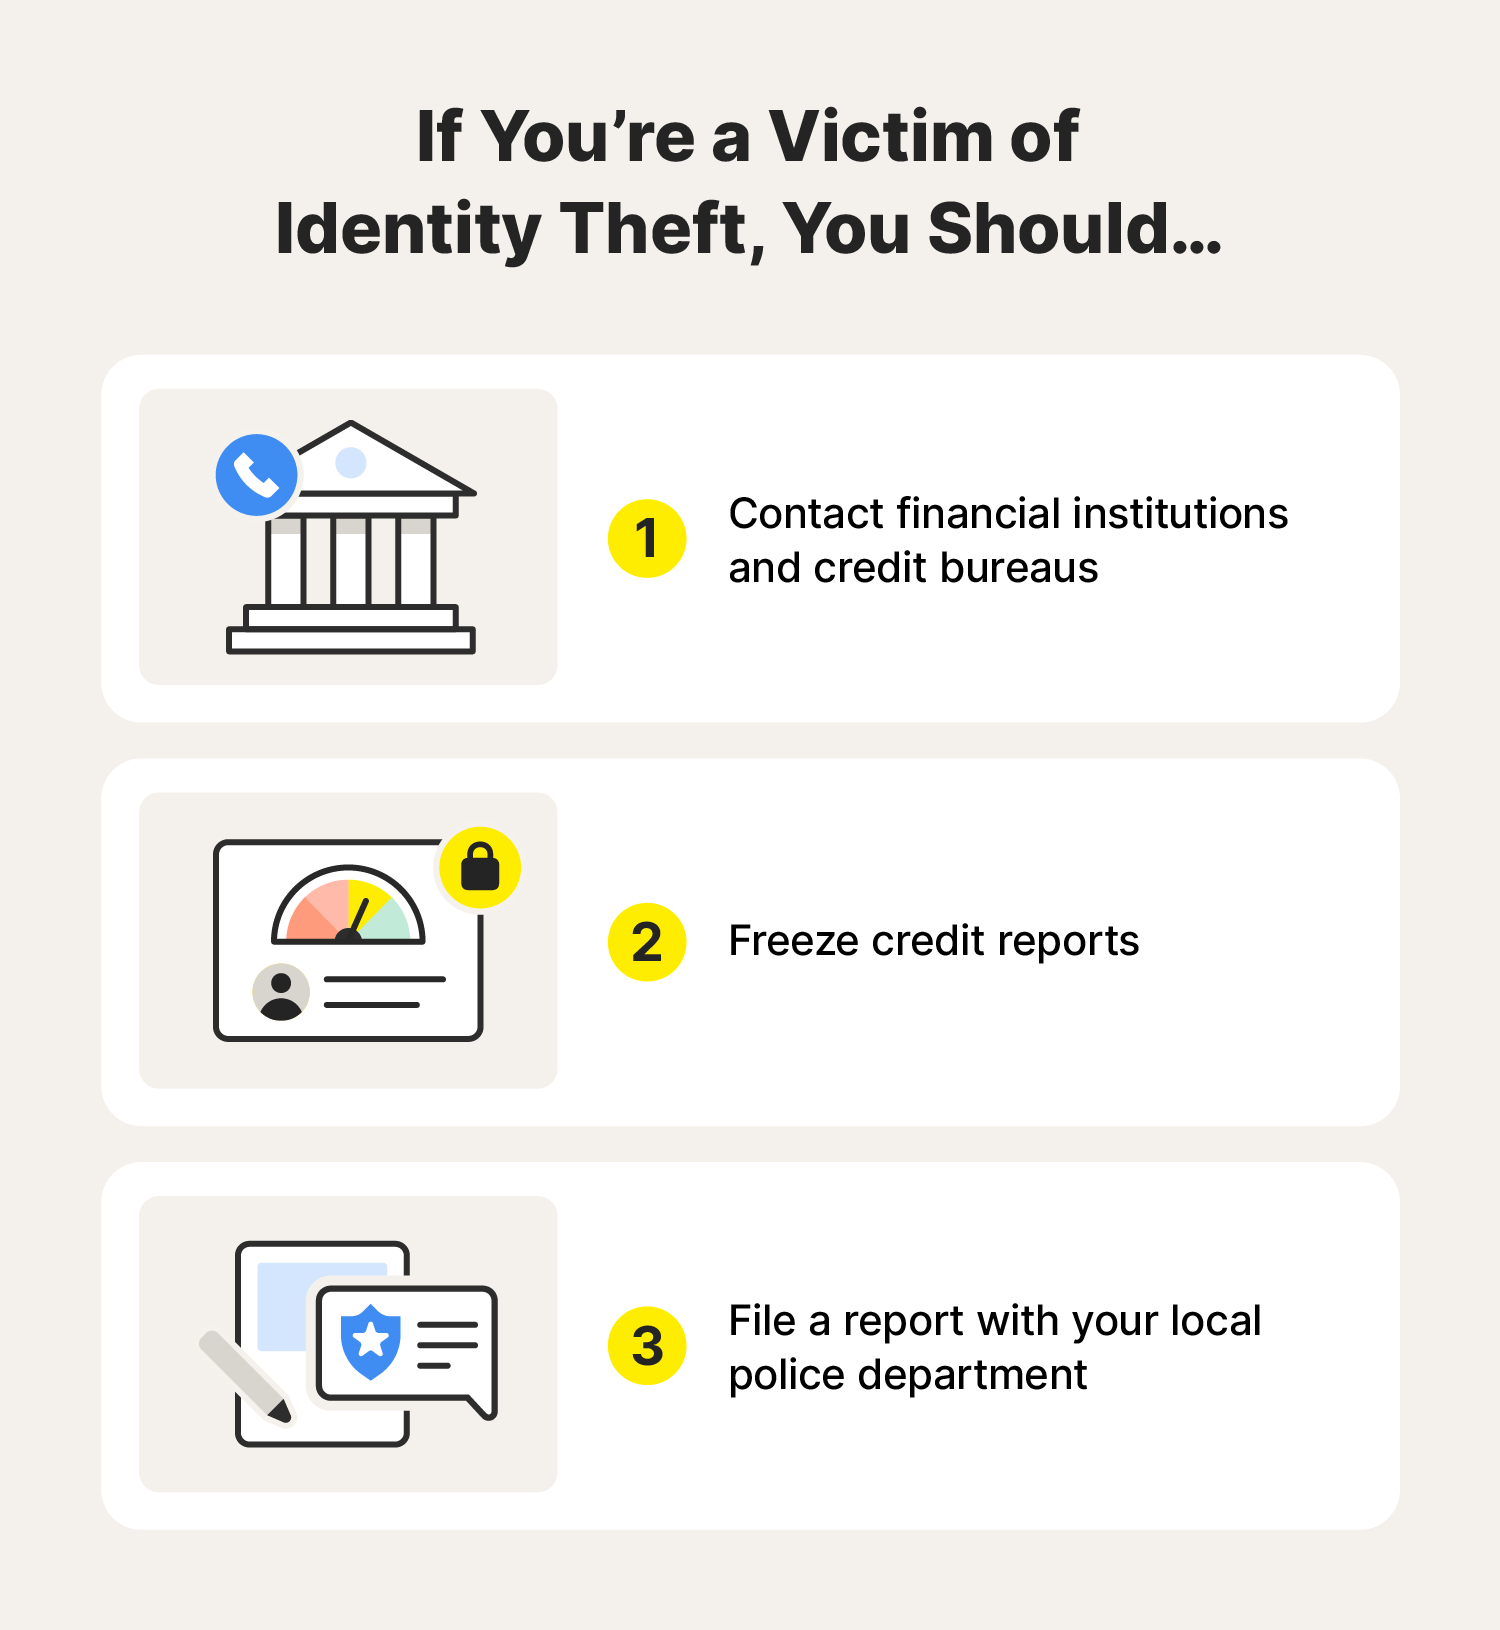 A graphic explains what to do if you’re a victim of identity theft.